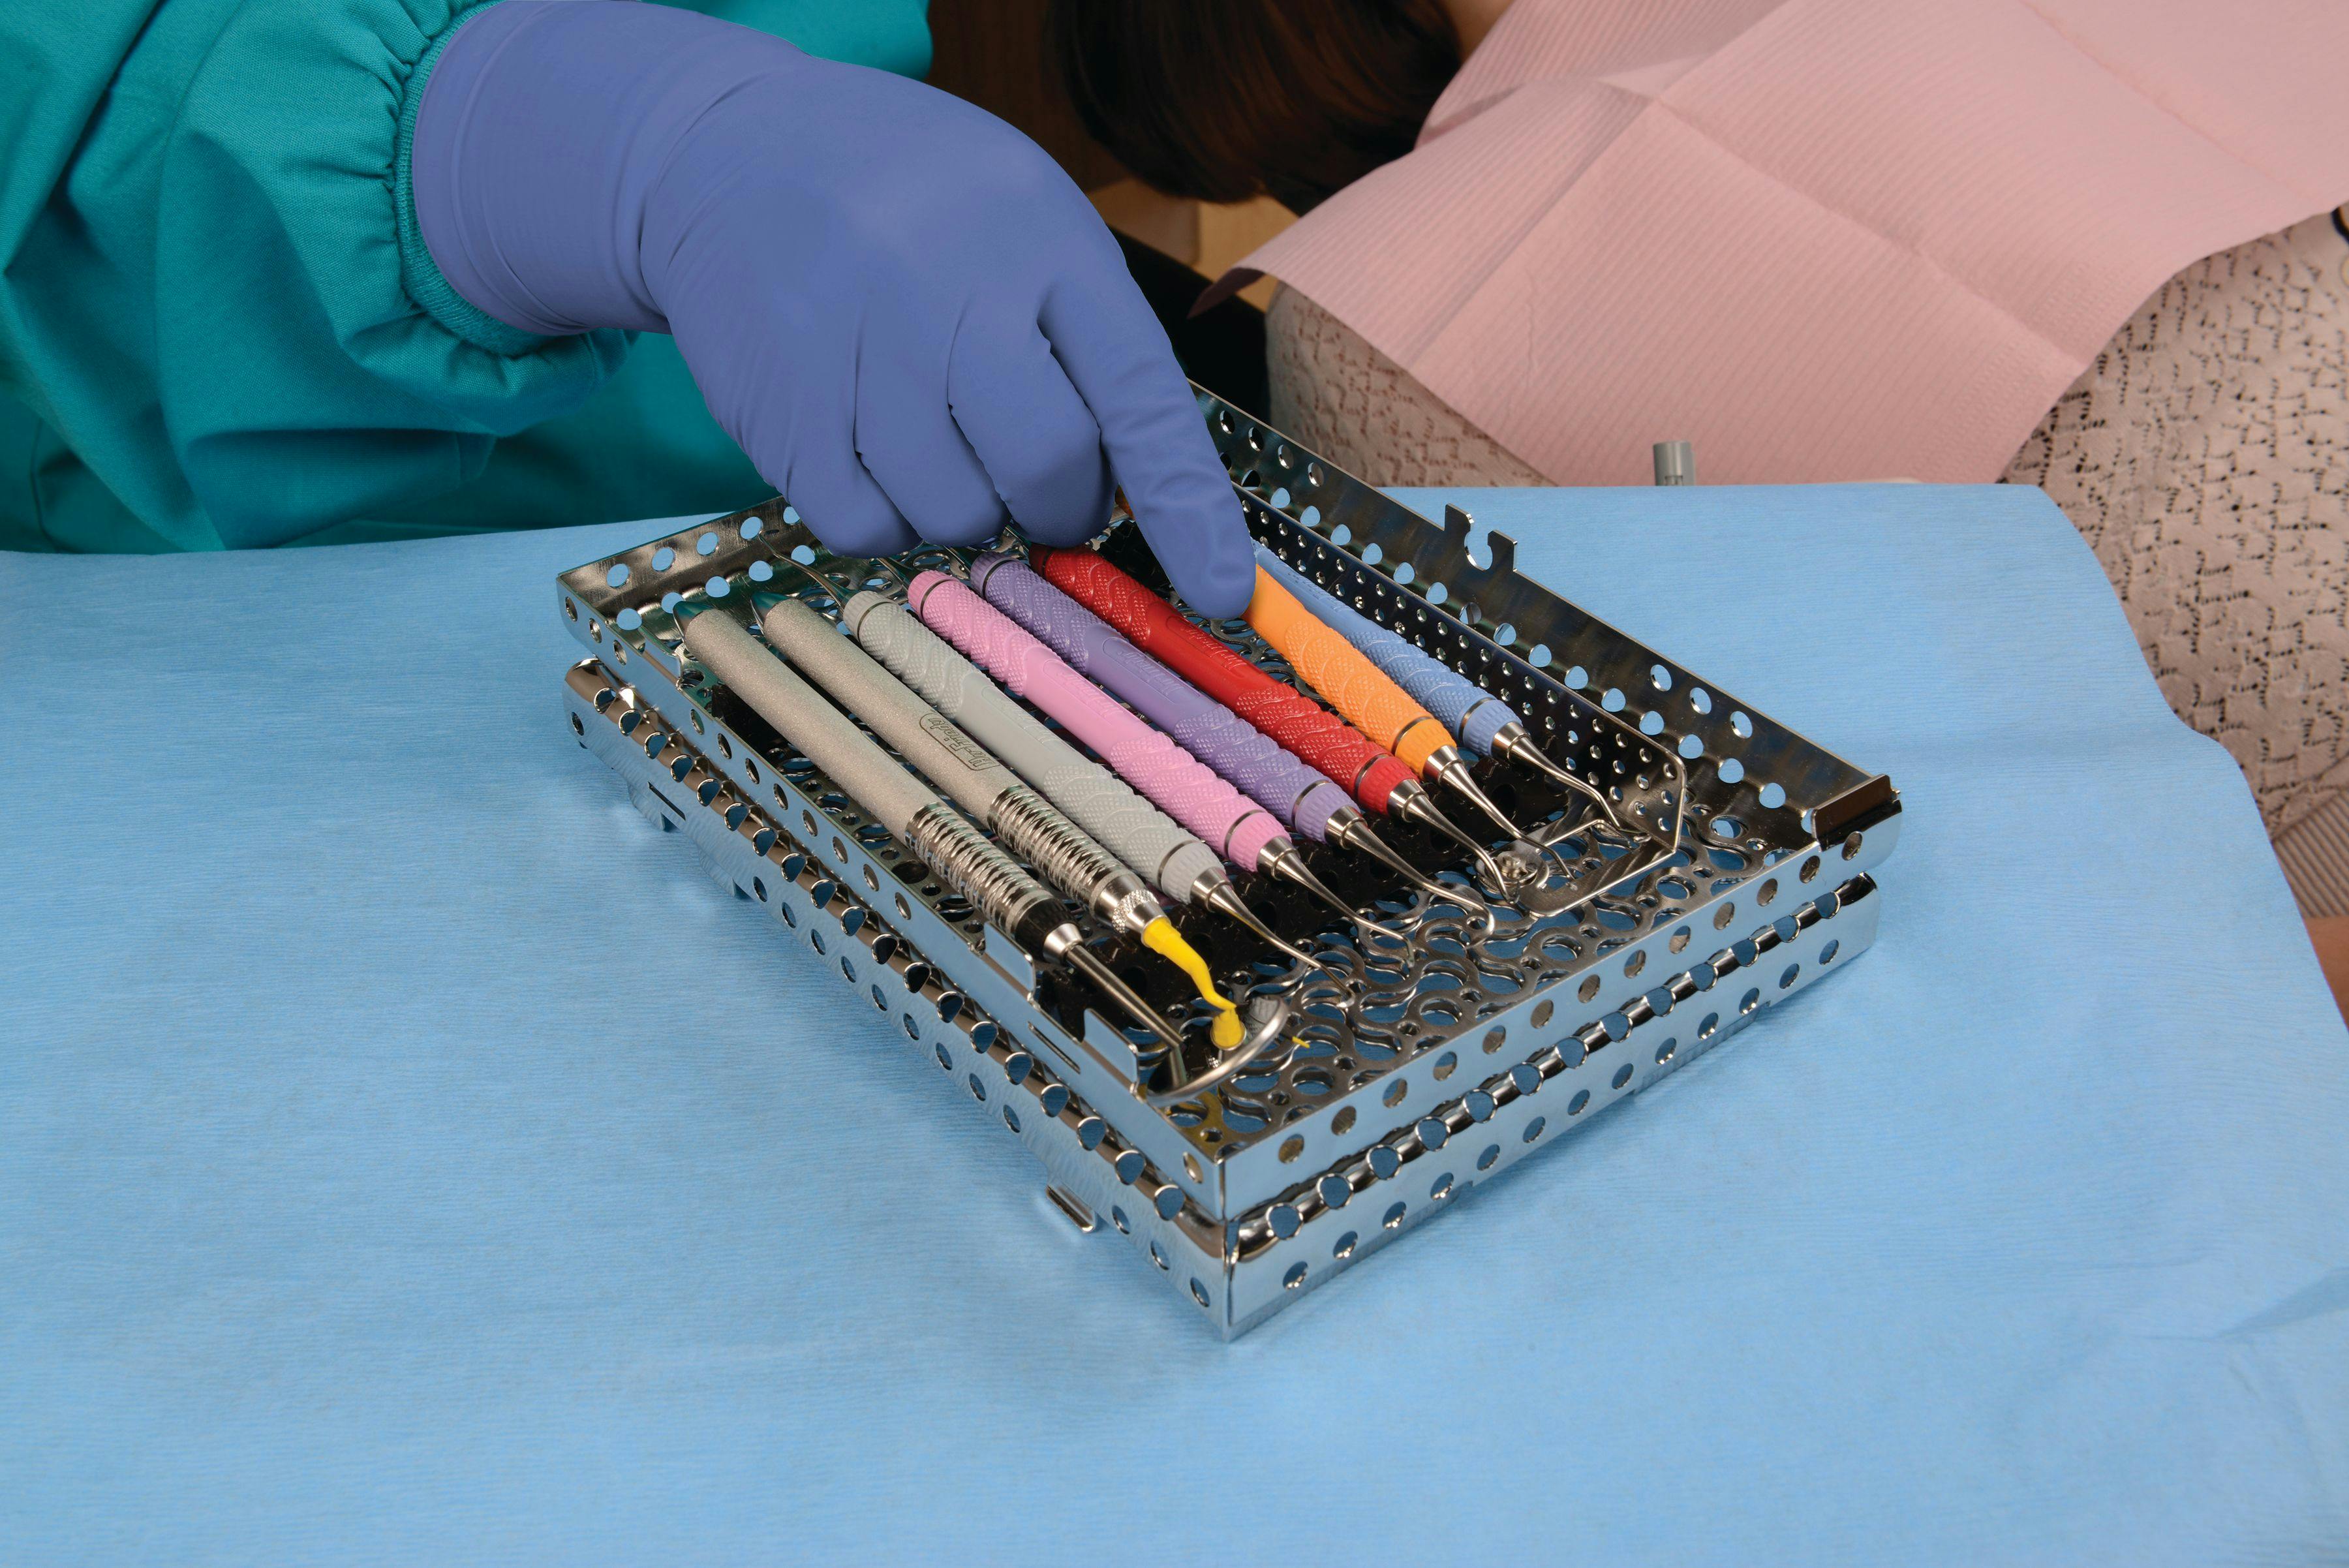 The List: Top 3 Tips for Organizing and Sterilizing Your Instruments 